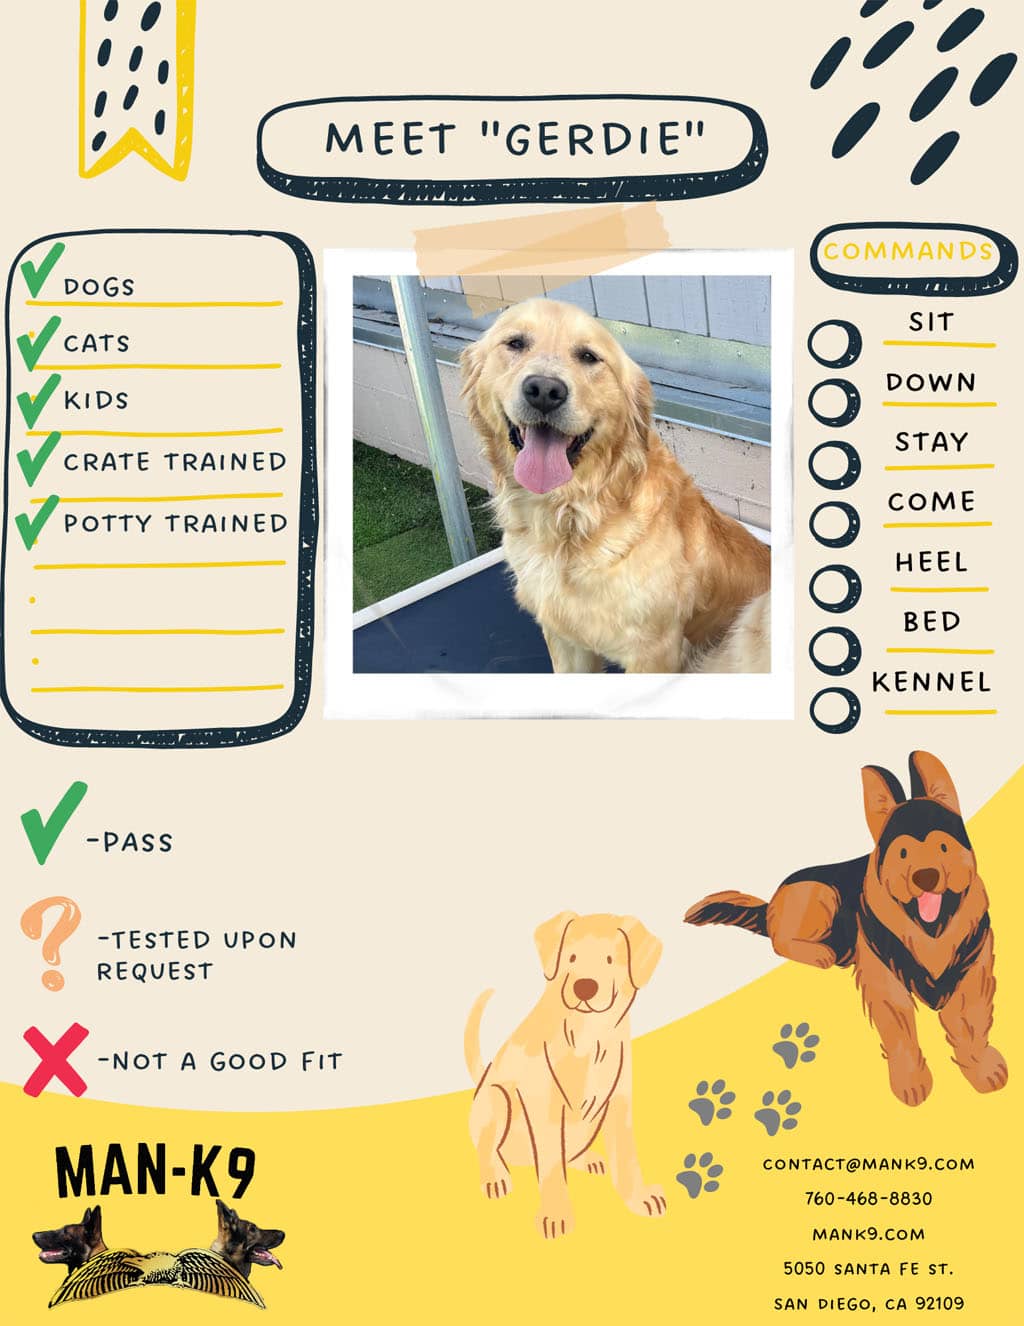 Poster advertising a trained golden retriever named "gerdie" available for adoption, detailing her traits and contact information for man-k9.